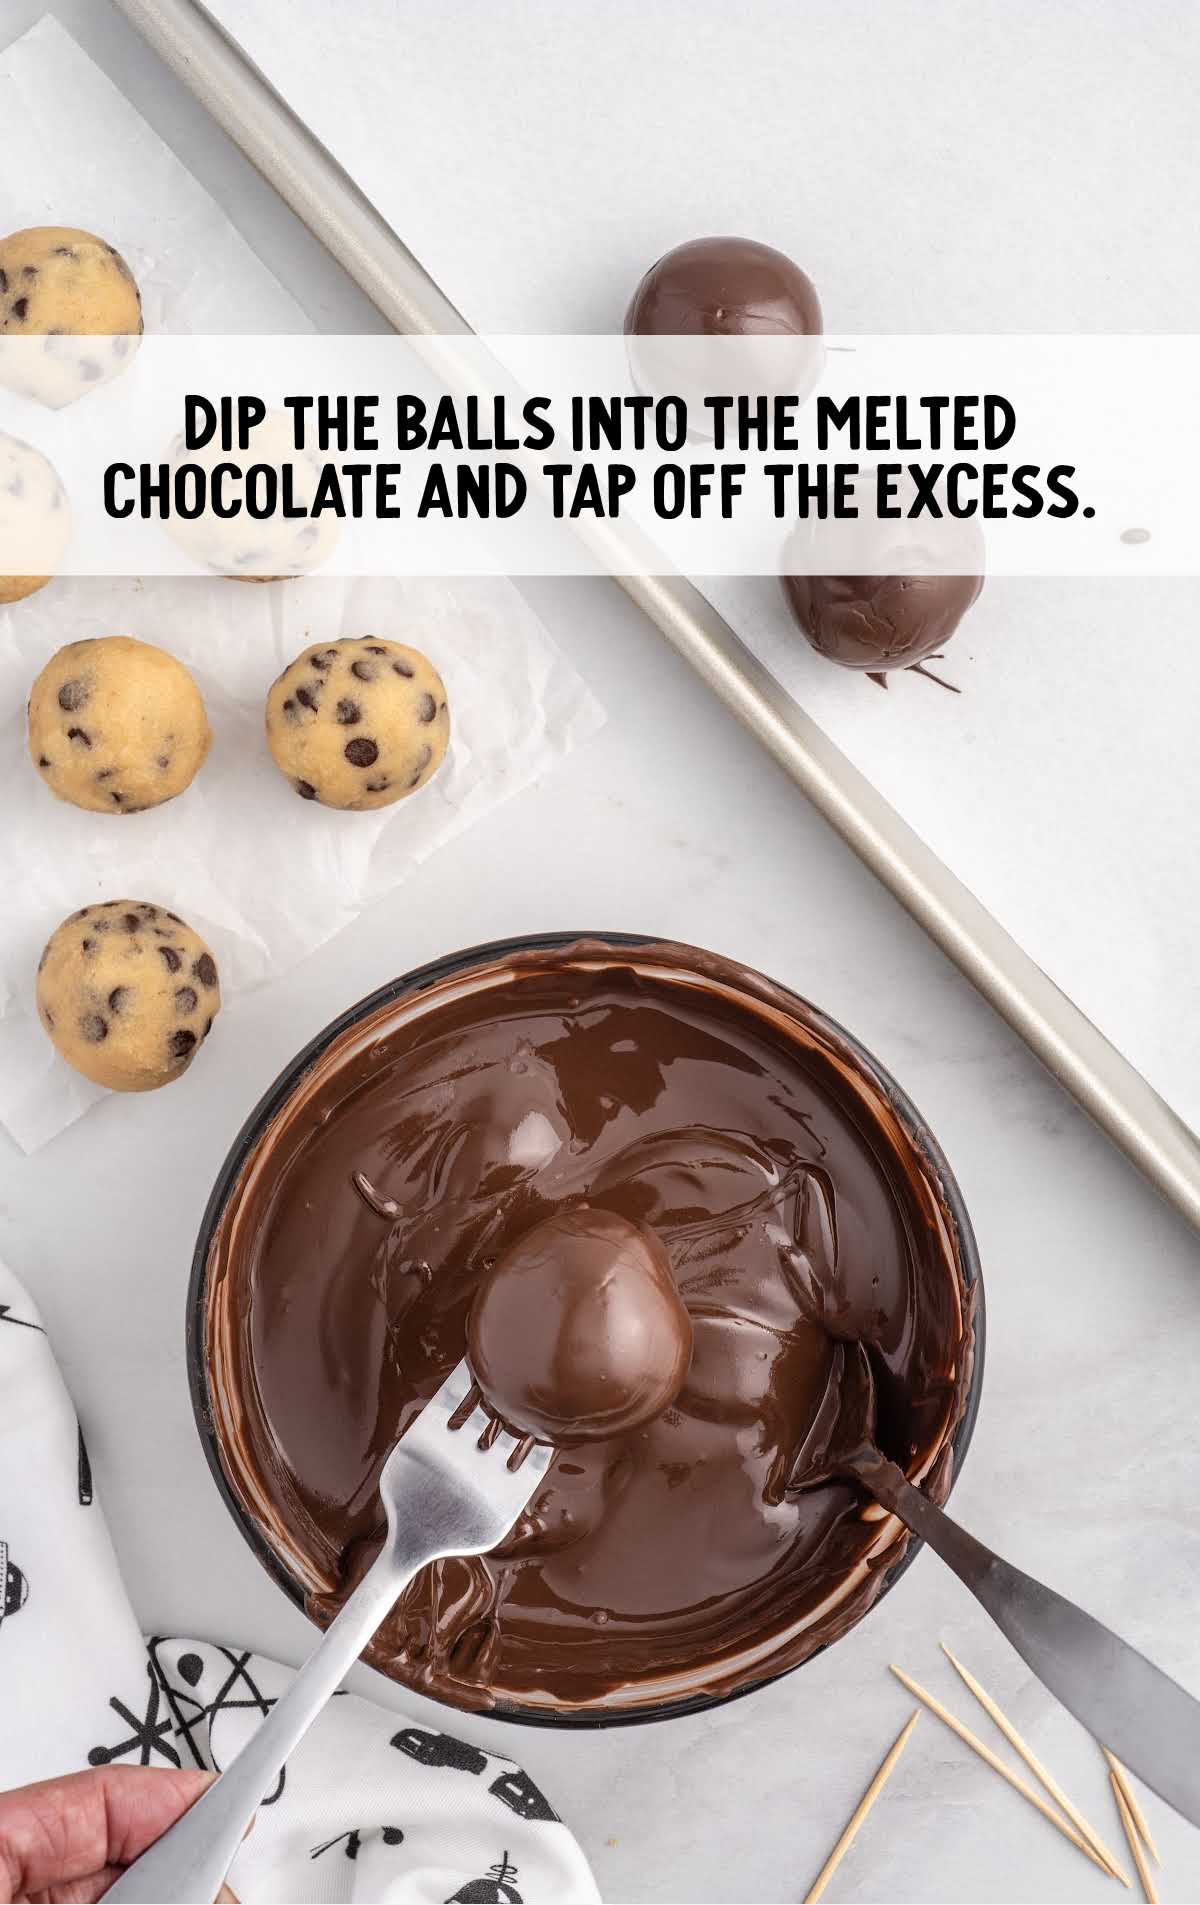 balls dipped into the melted chocolate